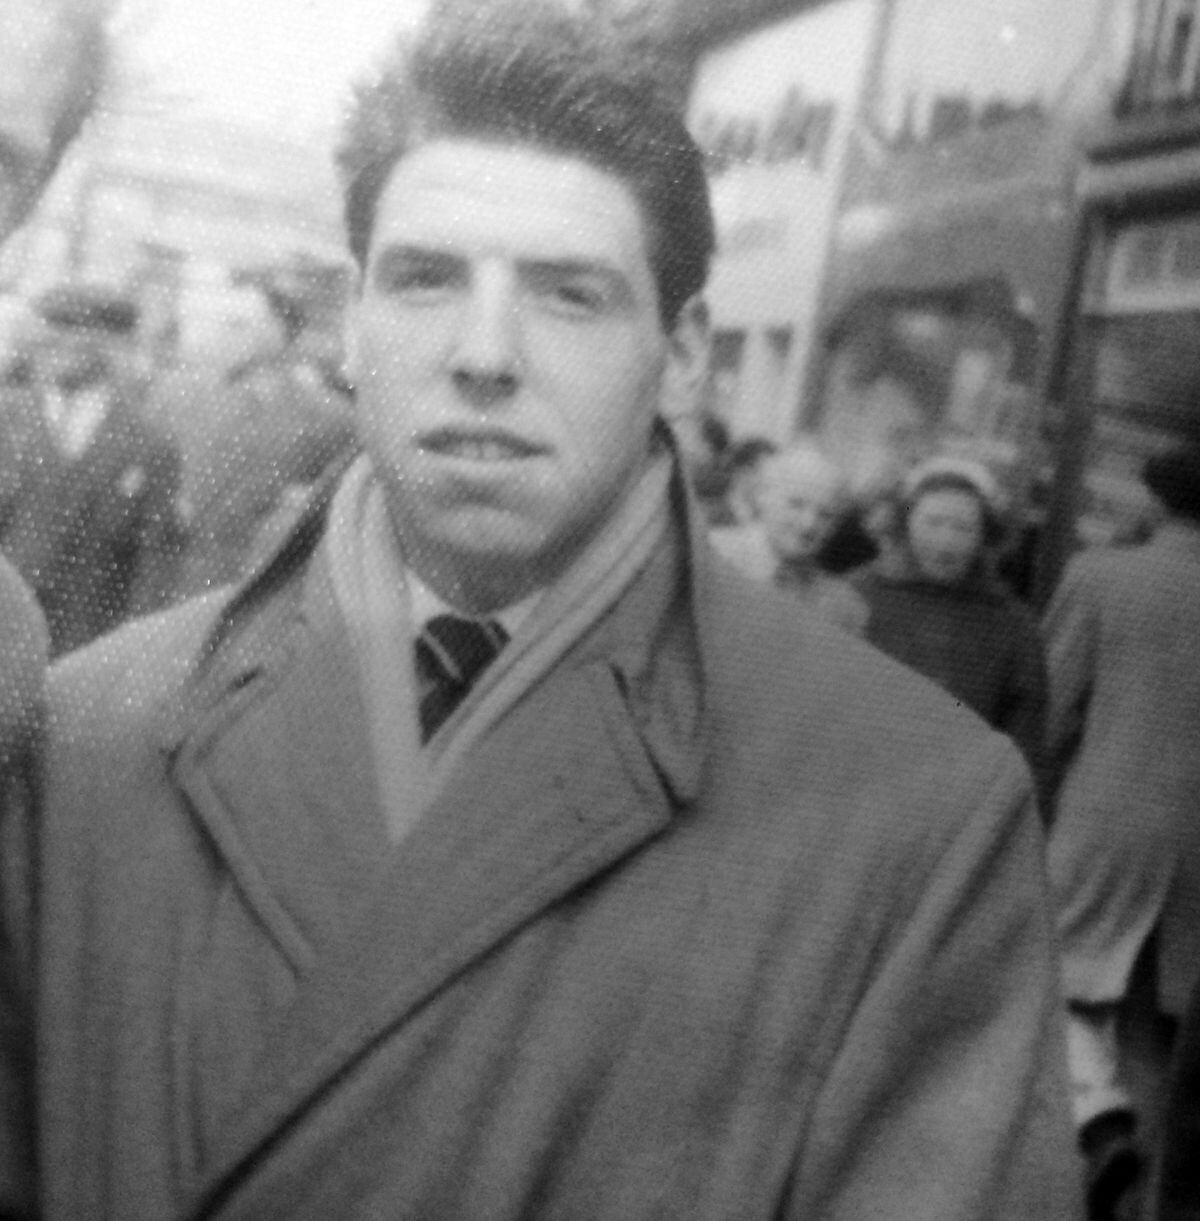 In Manchester in 1960 on his way to watch his beloved Manchester United.